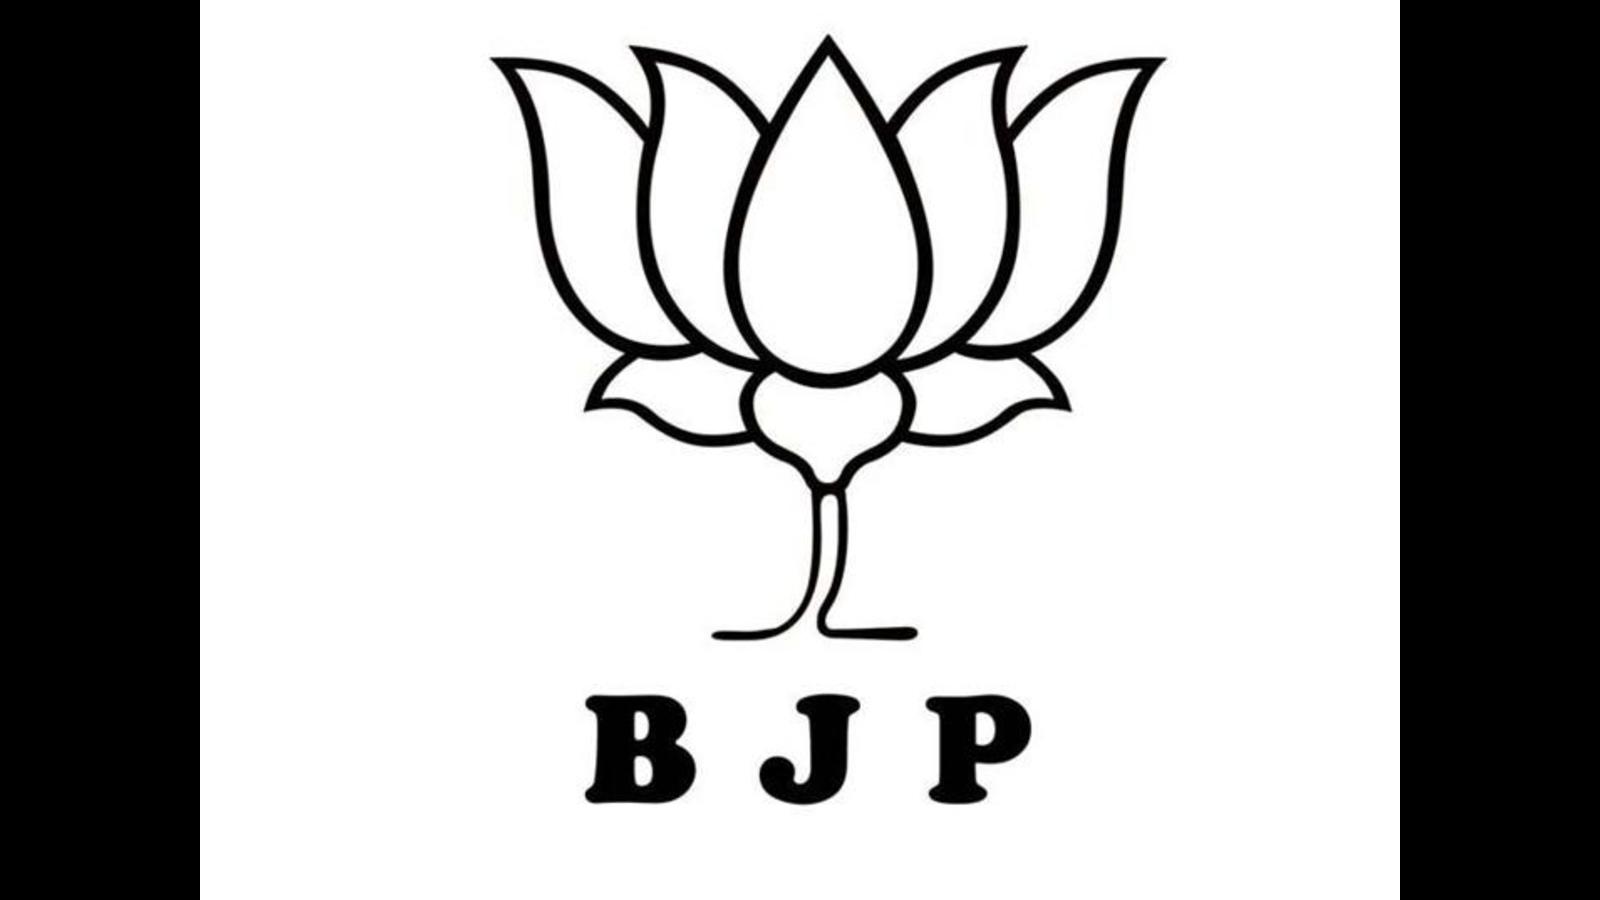 Bjp font Black and White Stock Photos & Images - Alamy